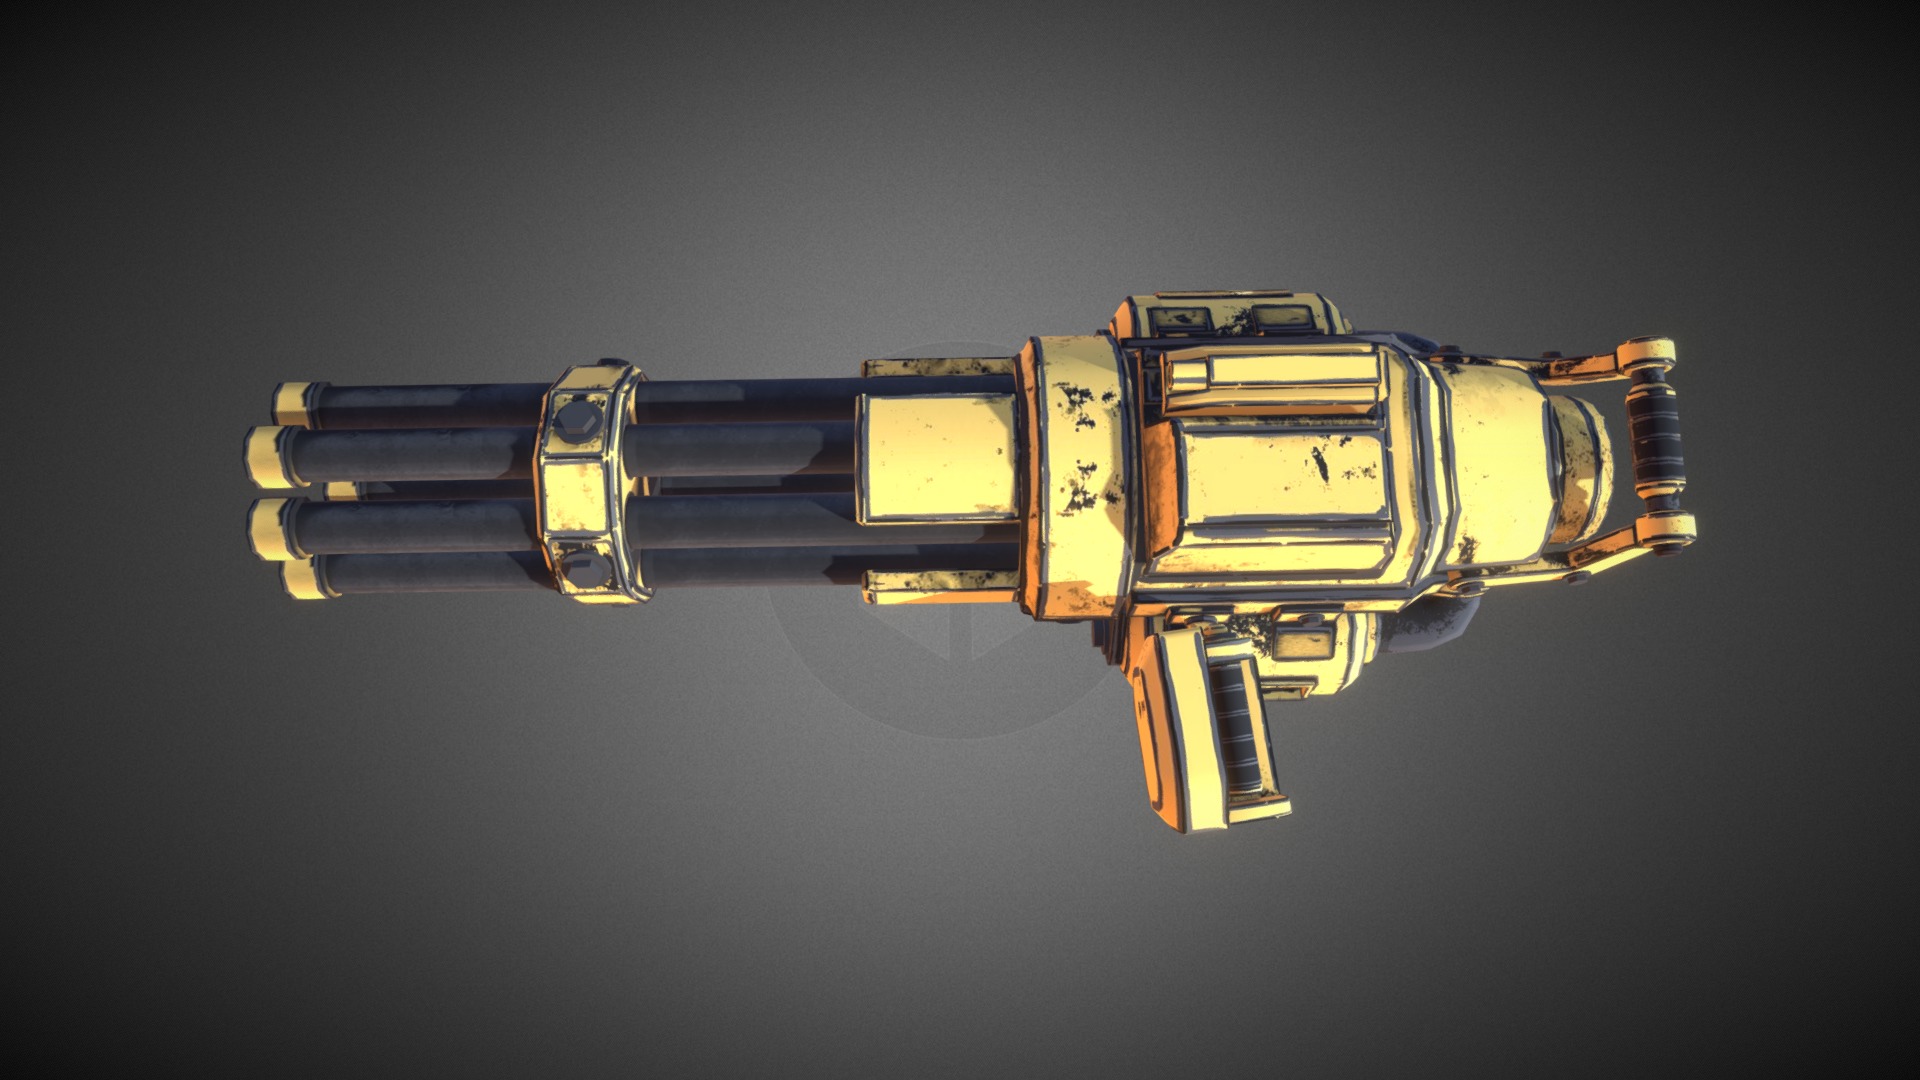 Low Poly Minigun for Mobile First Person Shooter game - Minigun Zombie Conspiracy - 3D model by Mariano.Castro 3d model